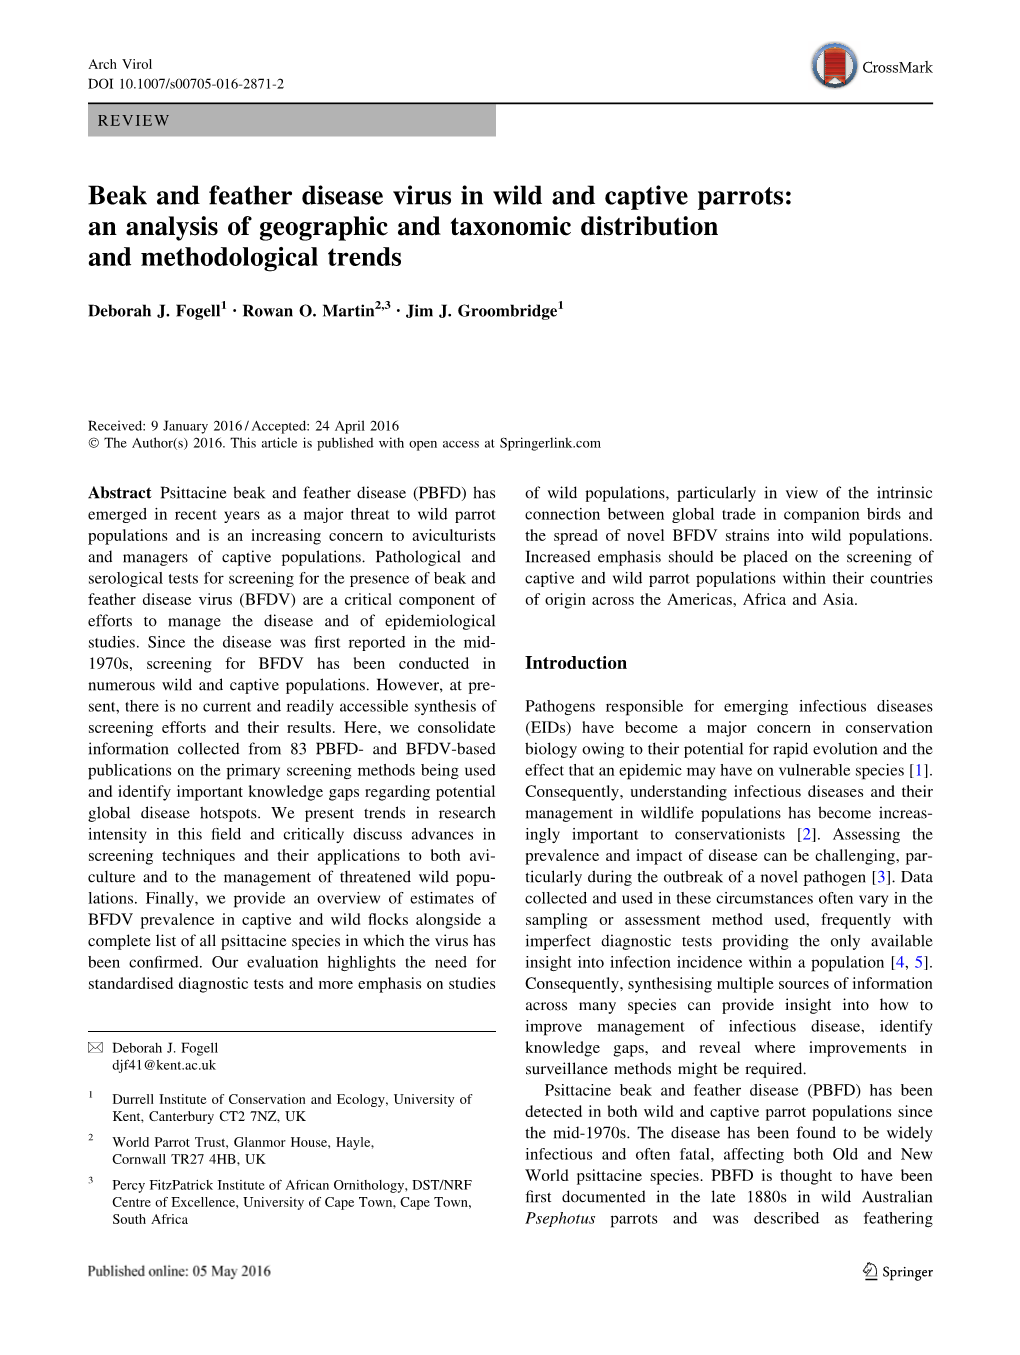 Beak and Feather Disease Virus in Wild and Captive Parrots: an Analysis of Geographic and Taxonomic Distribution and Methodological Trends